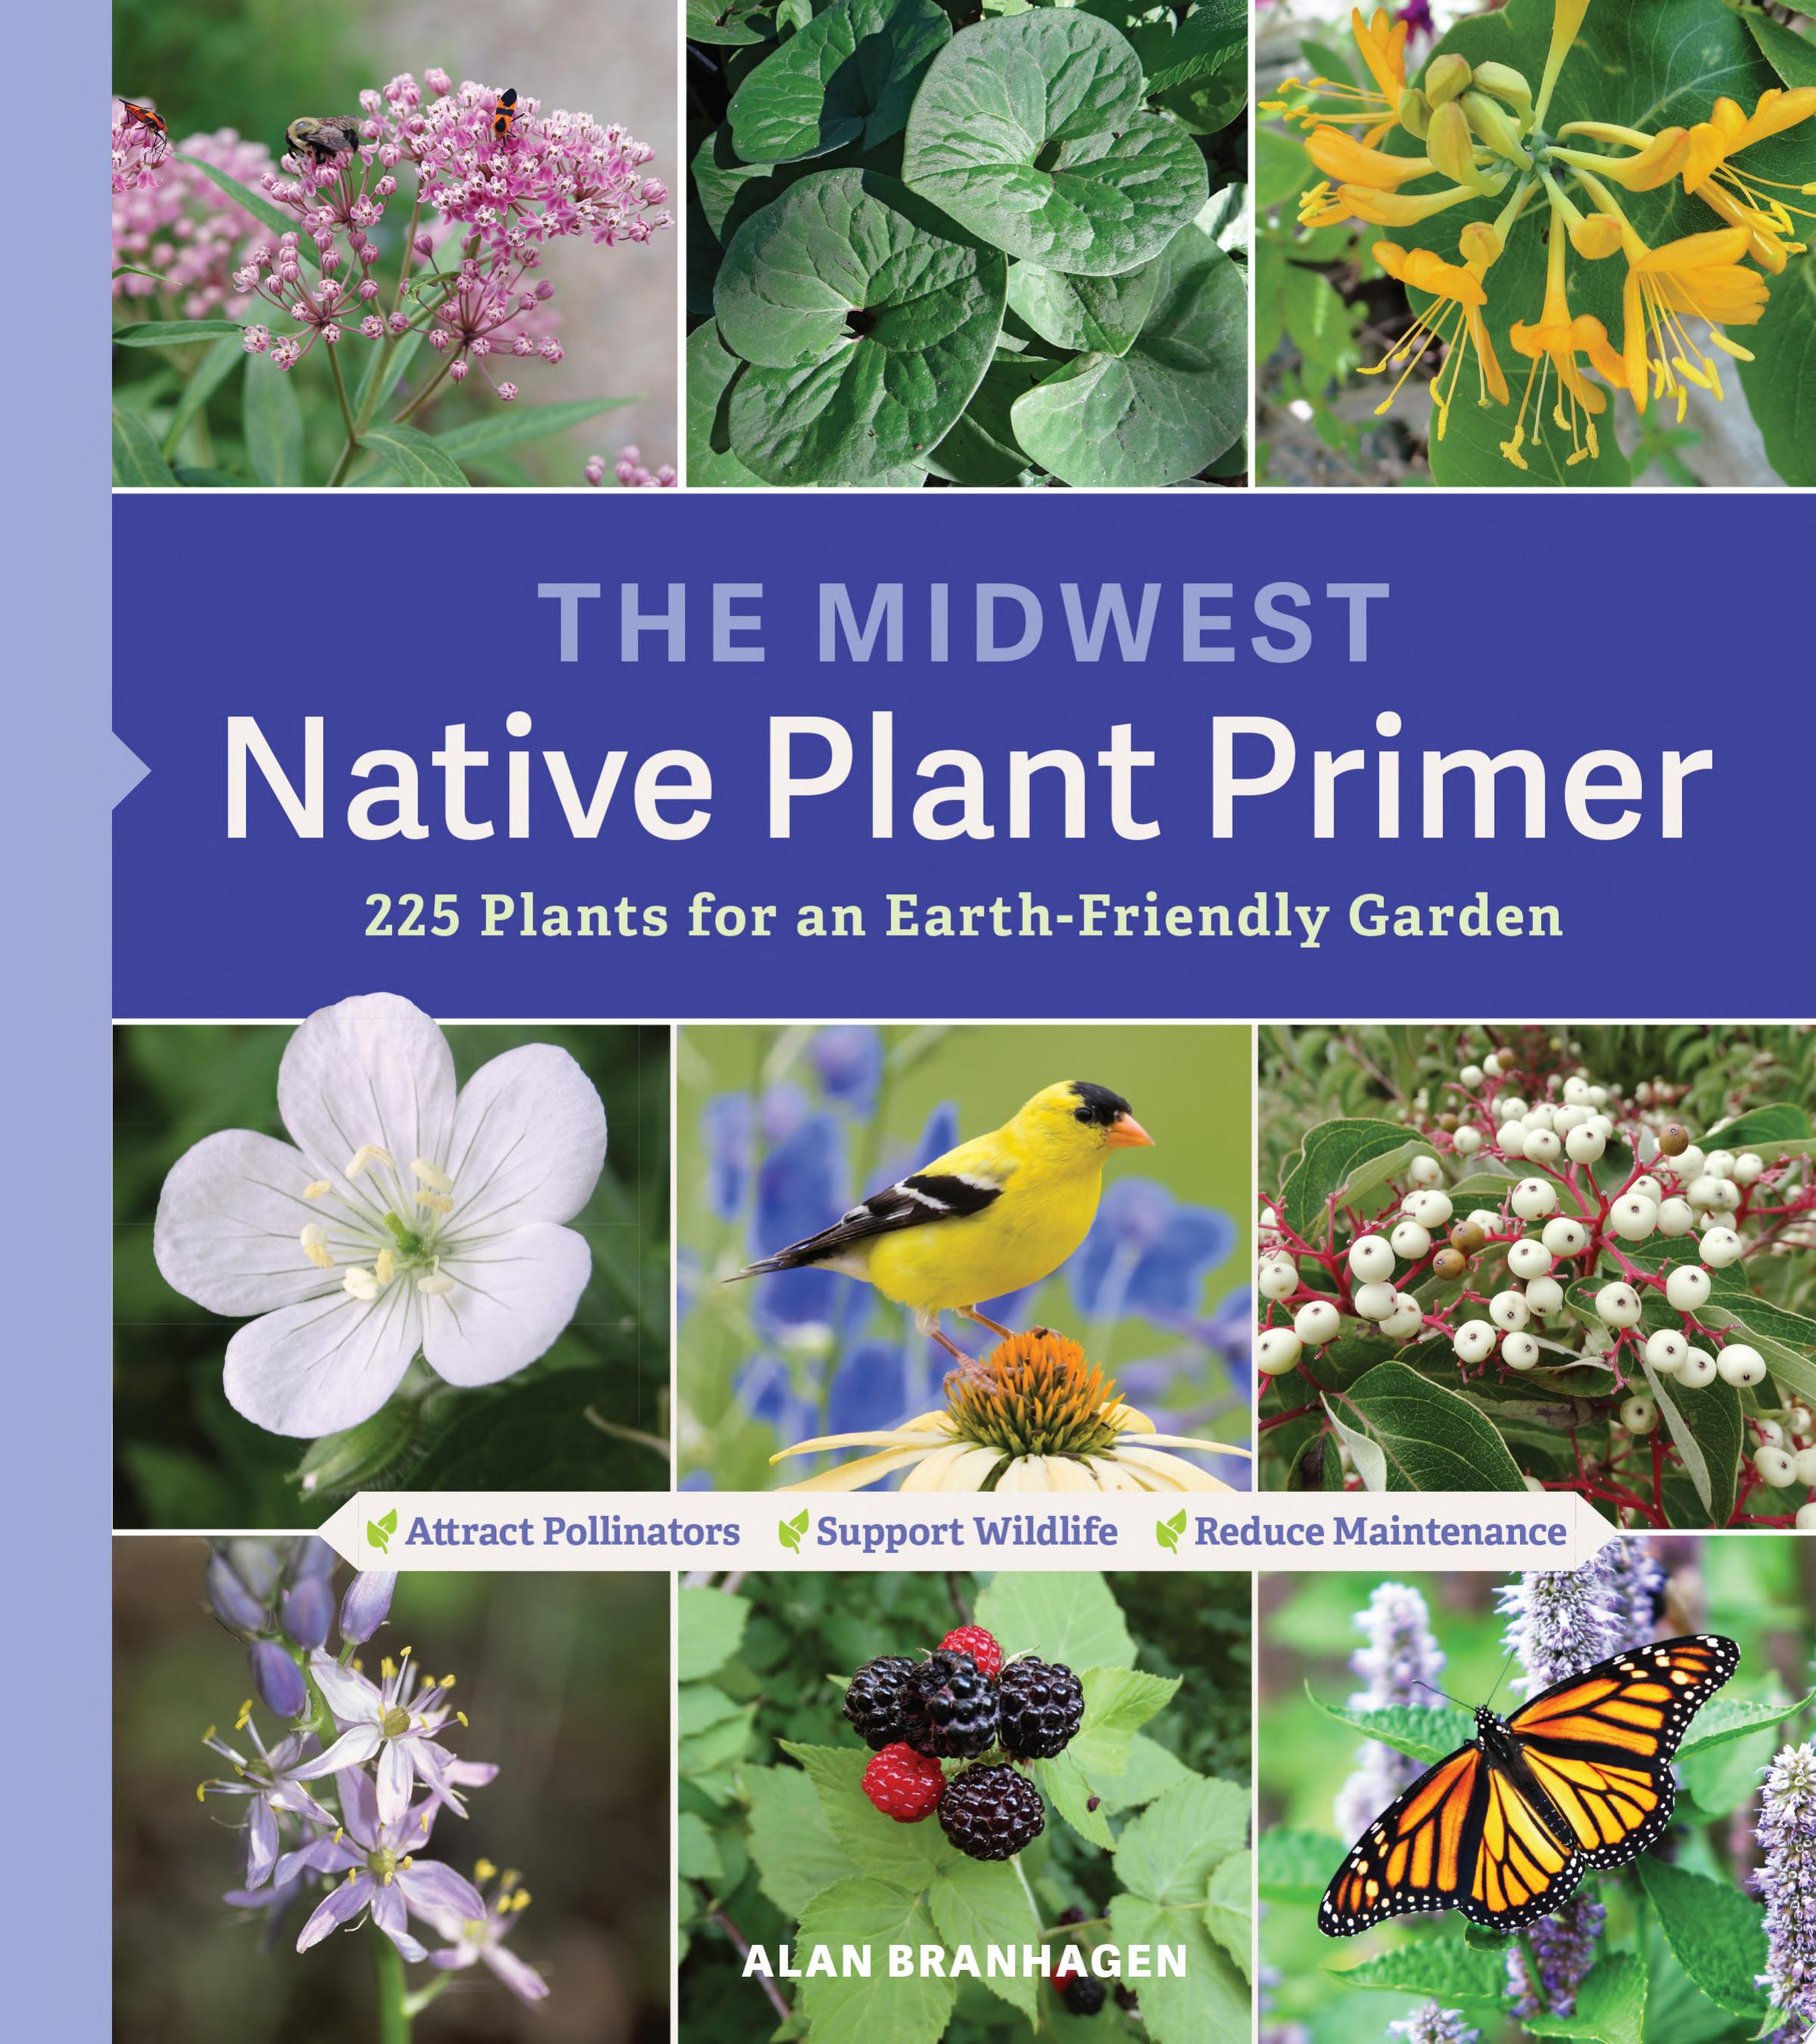 Image for "The Midwest Native Plant Primer"